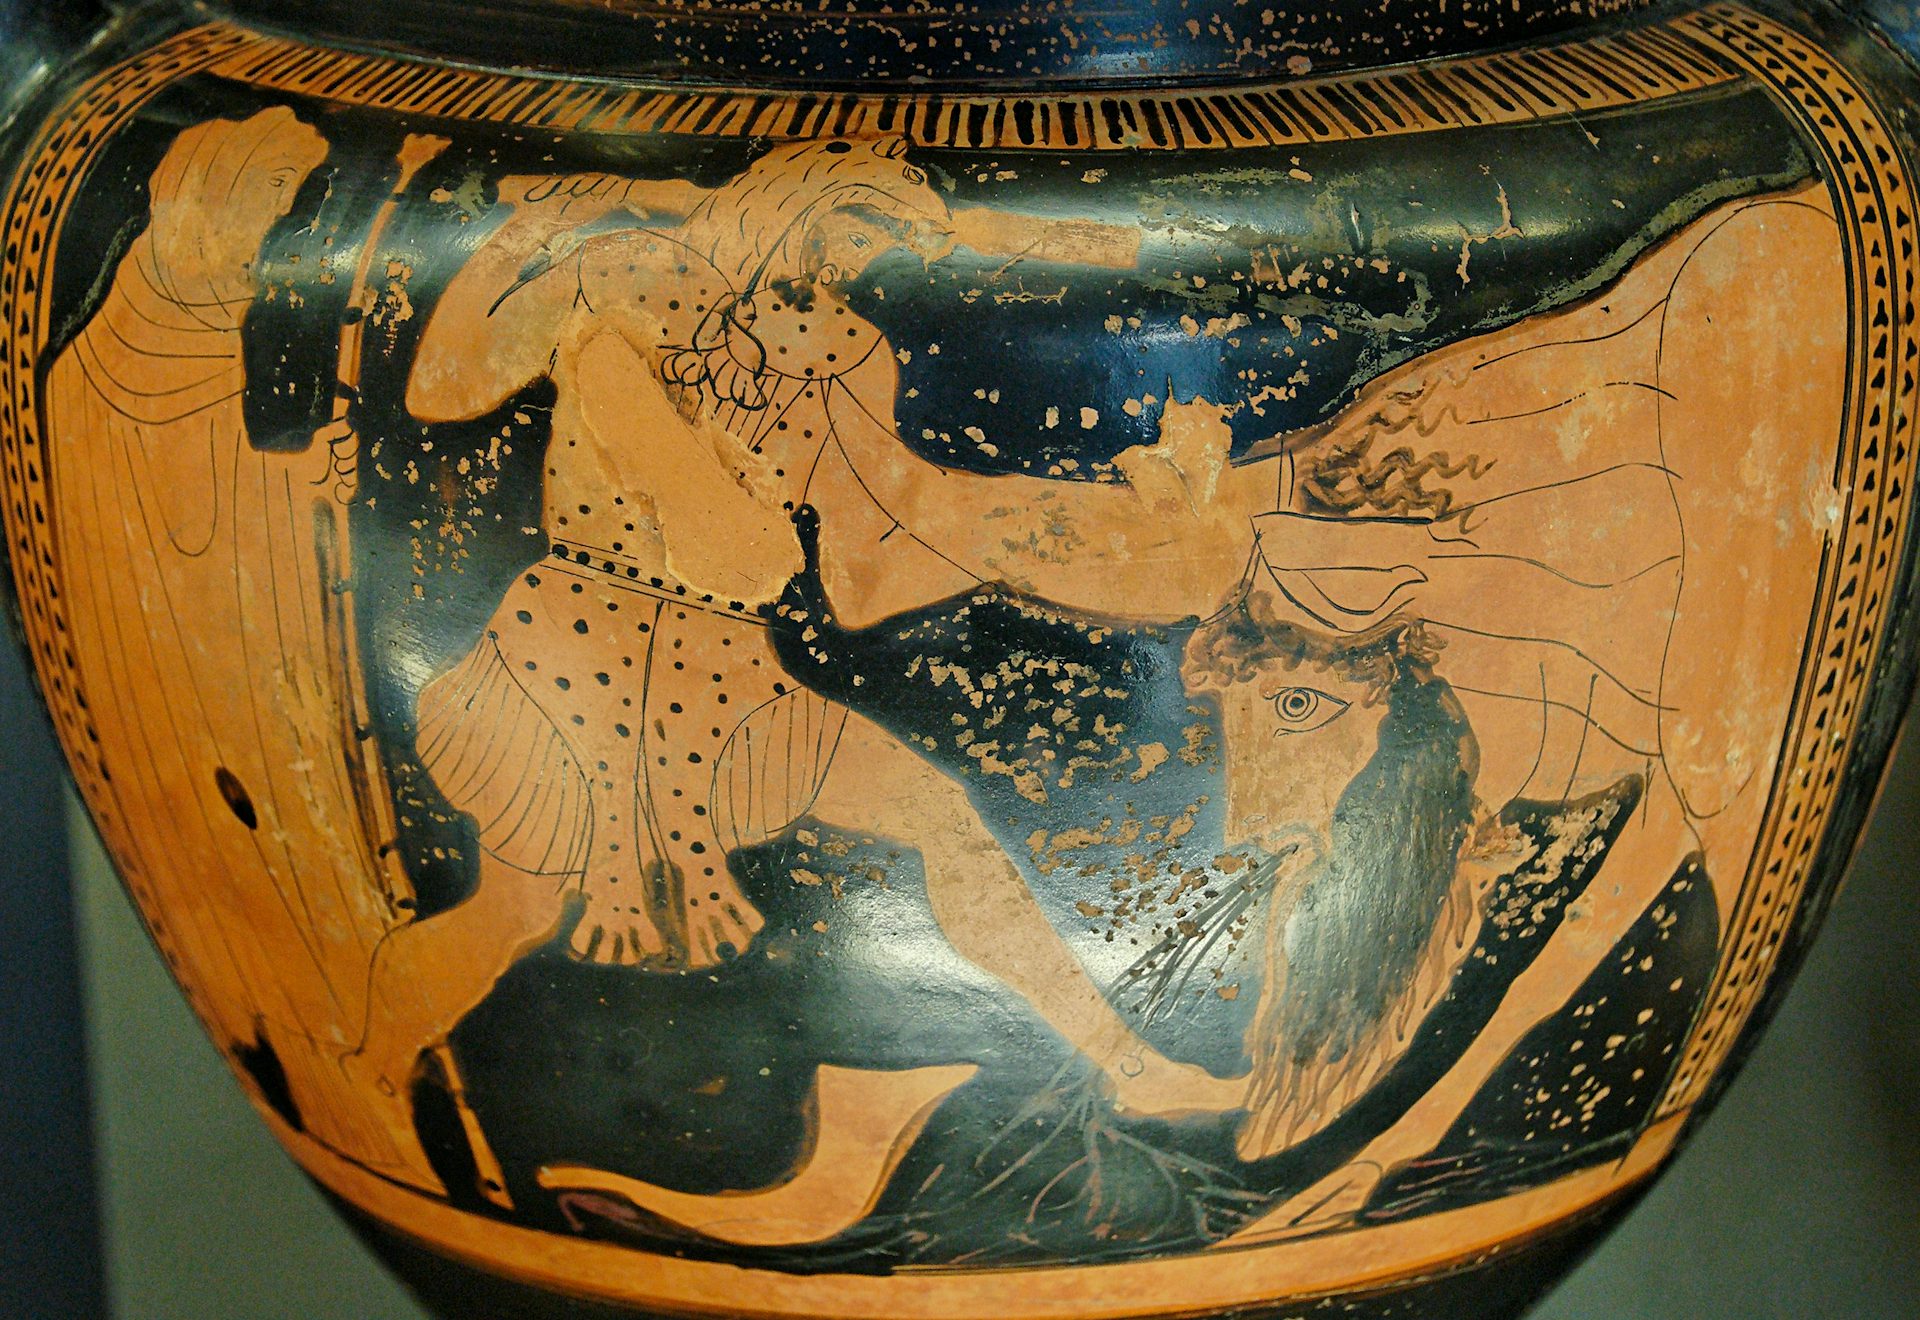 Vase painting of Heracles and Achelous fighting for Deianira’s hand